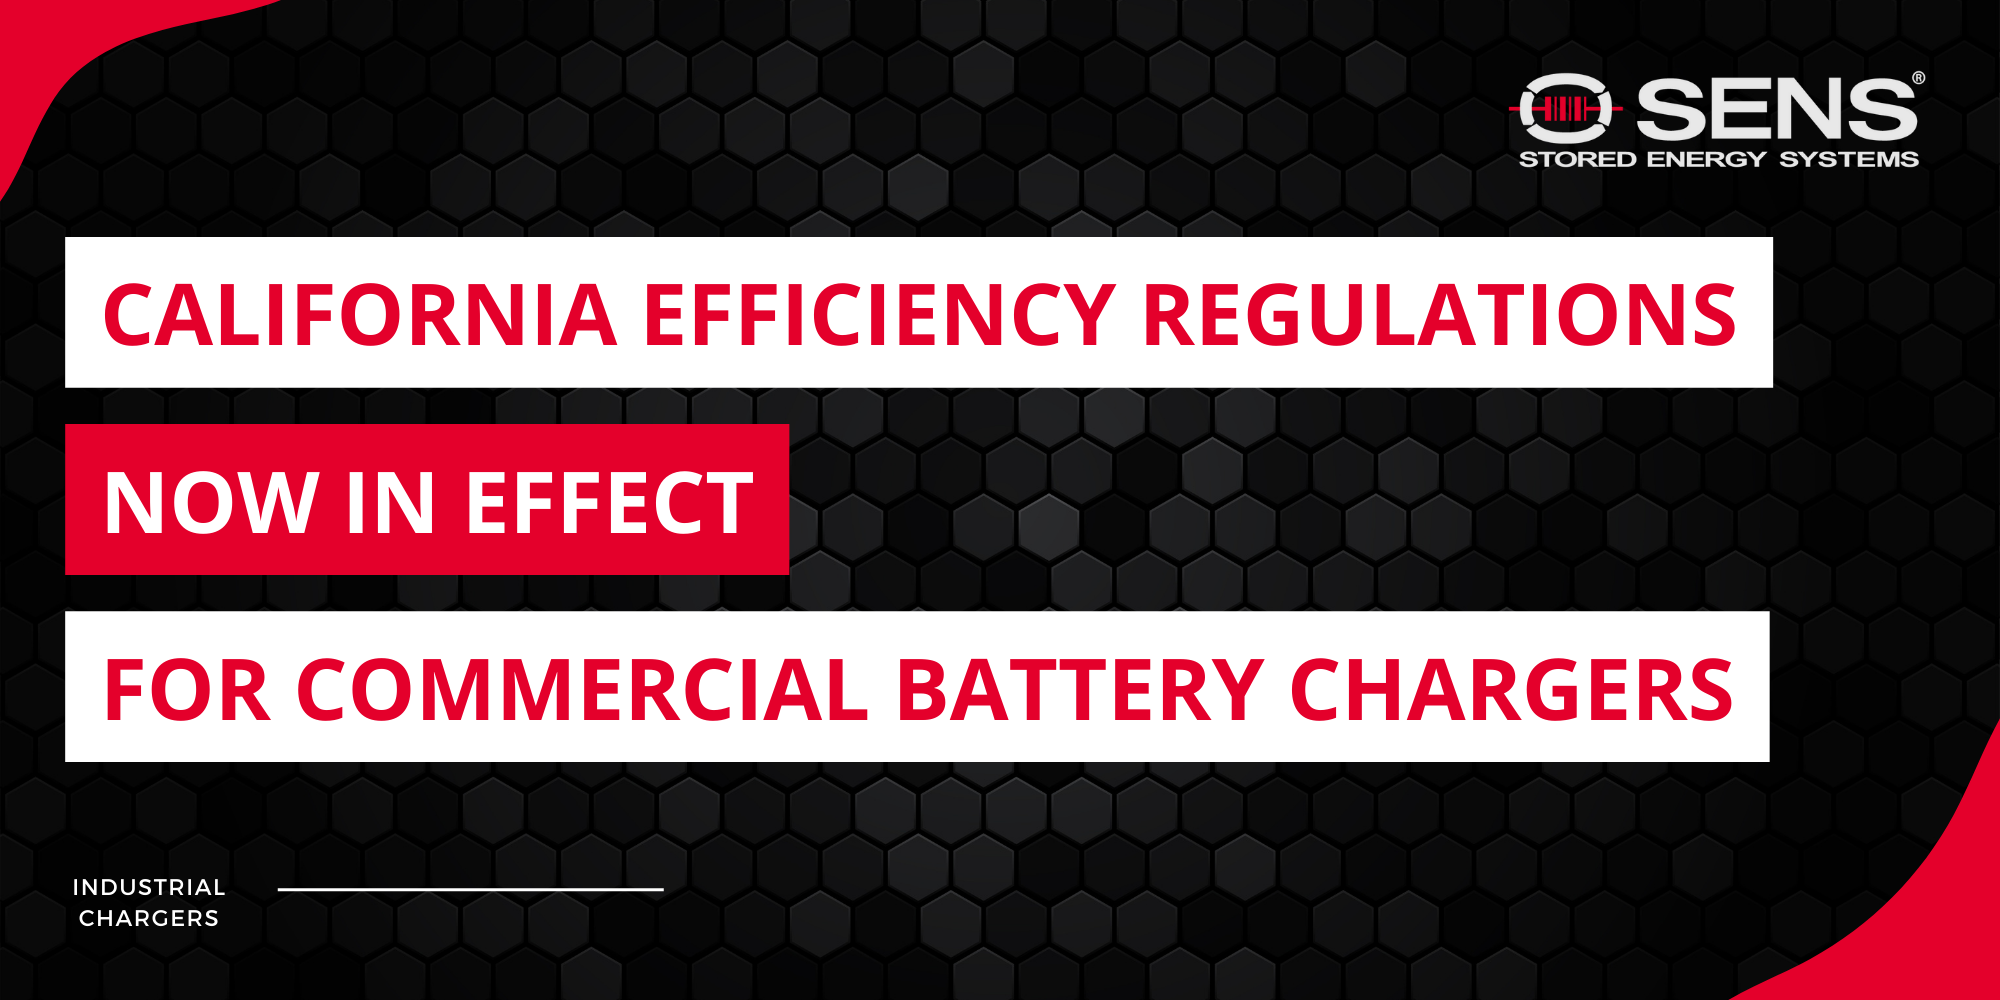 California Efficiency Regulations Now in Effect for Commercial Battery Chargers